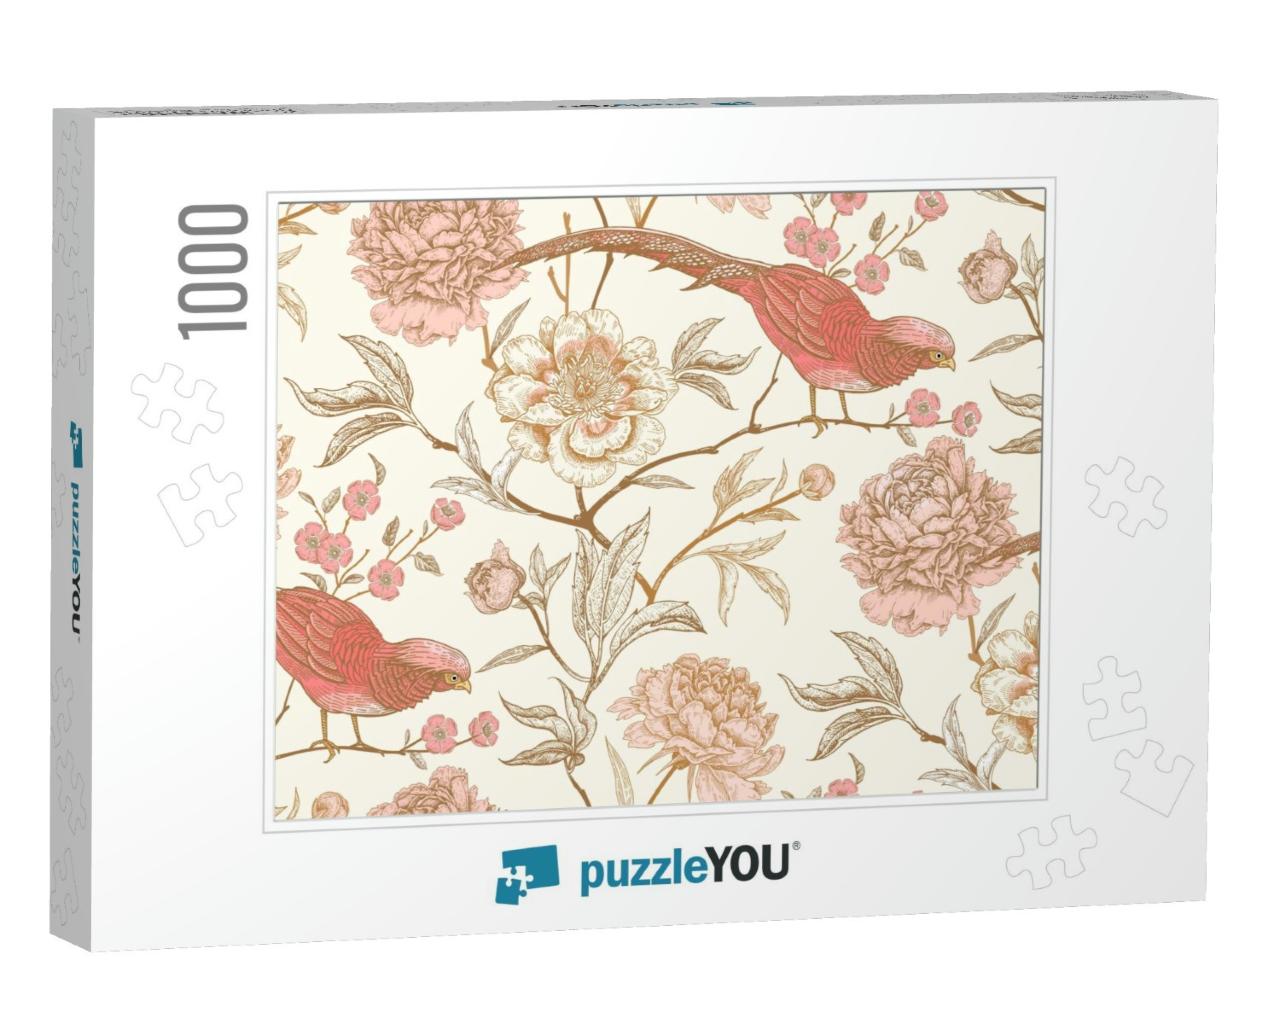 Peonies & Pheasants. Floral Vintage Seamless Pattern with... Jigsaw Puzzle with 1000 pieces